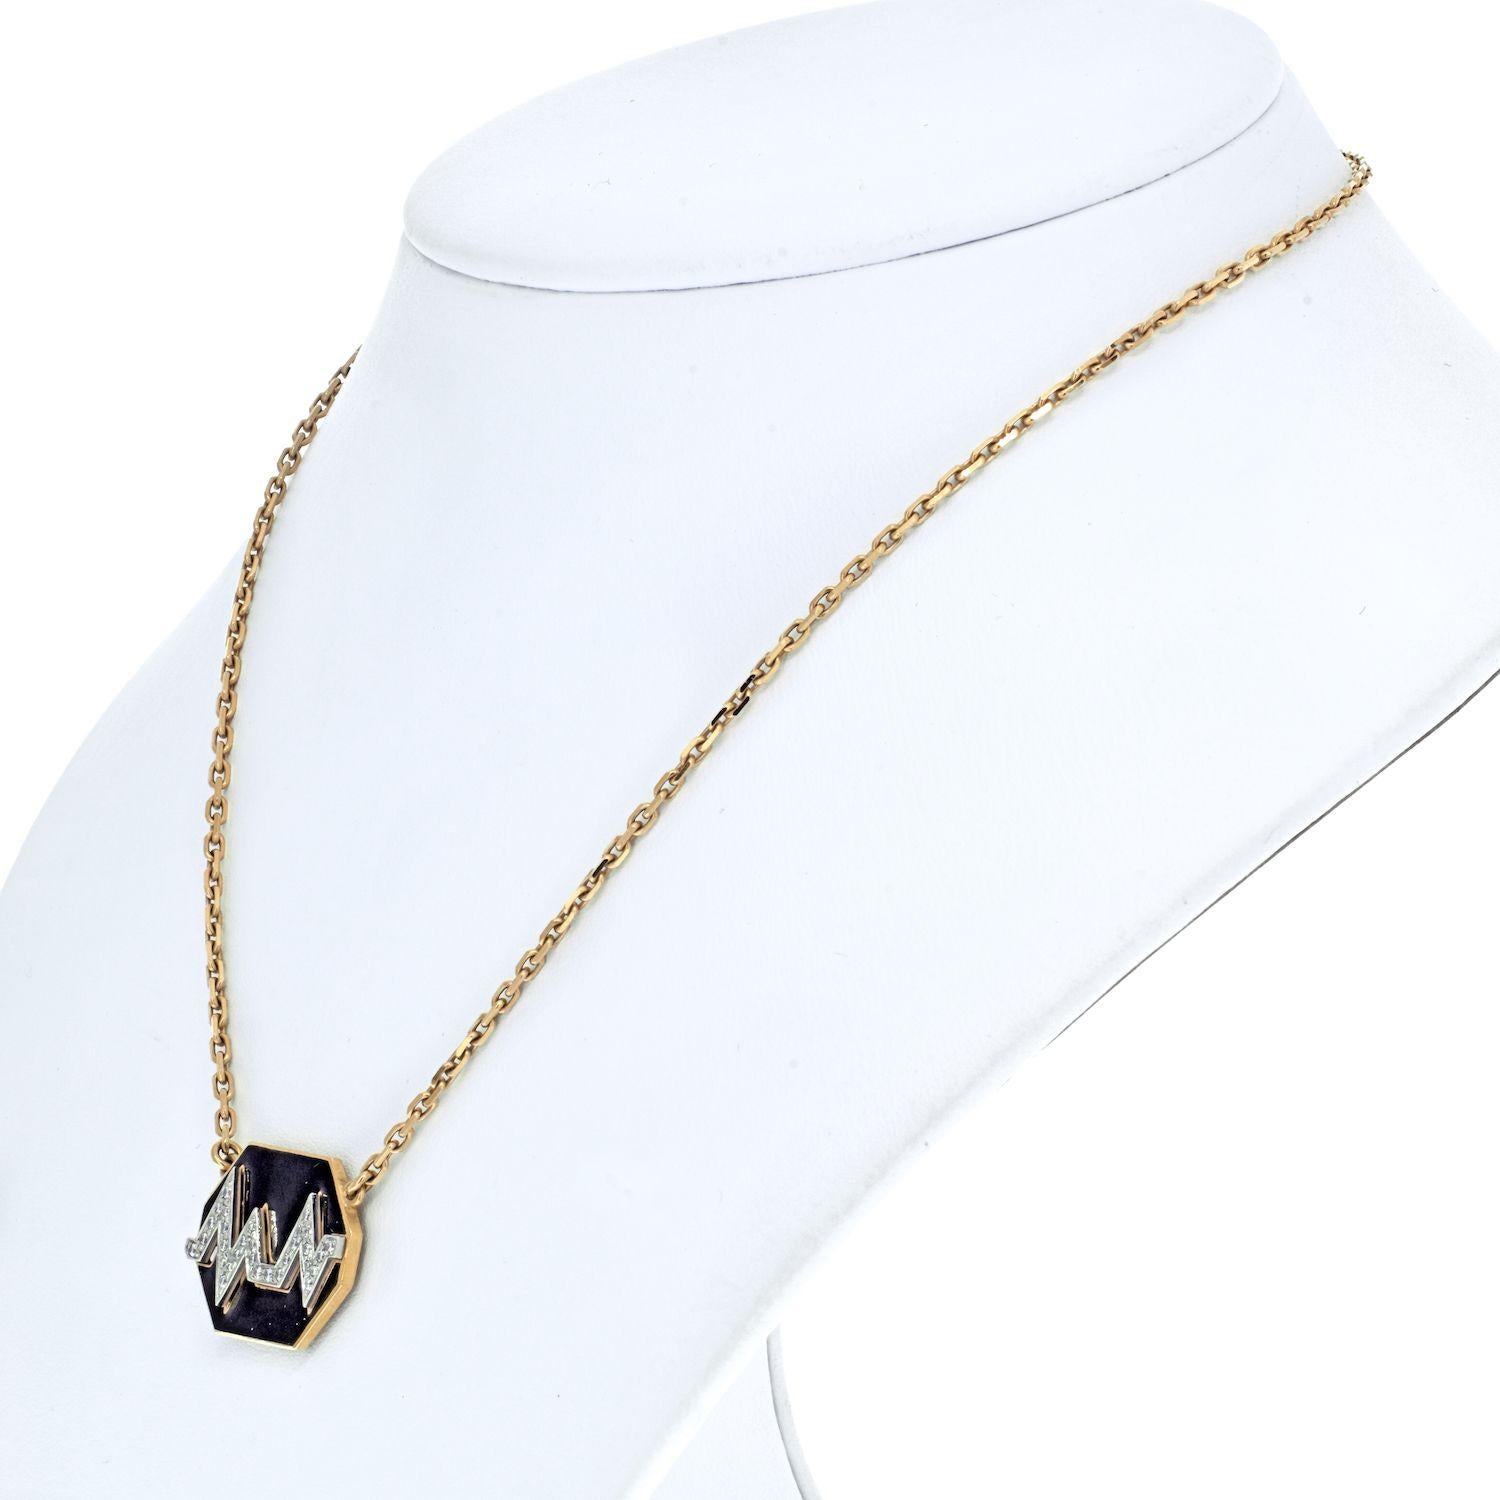 Current model from David Webb this is one trendy pendant: David Webb 18K Yellow Gold 